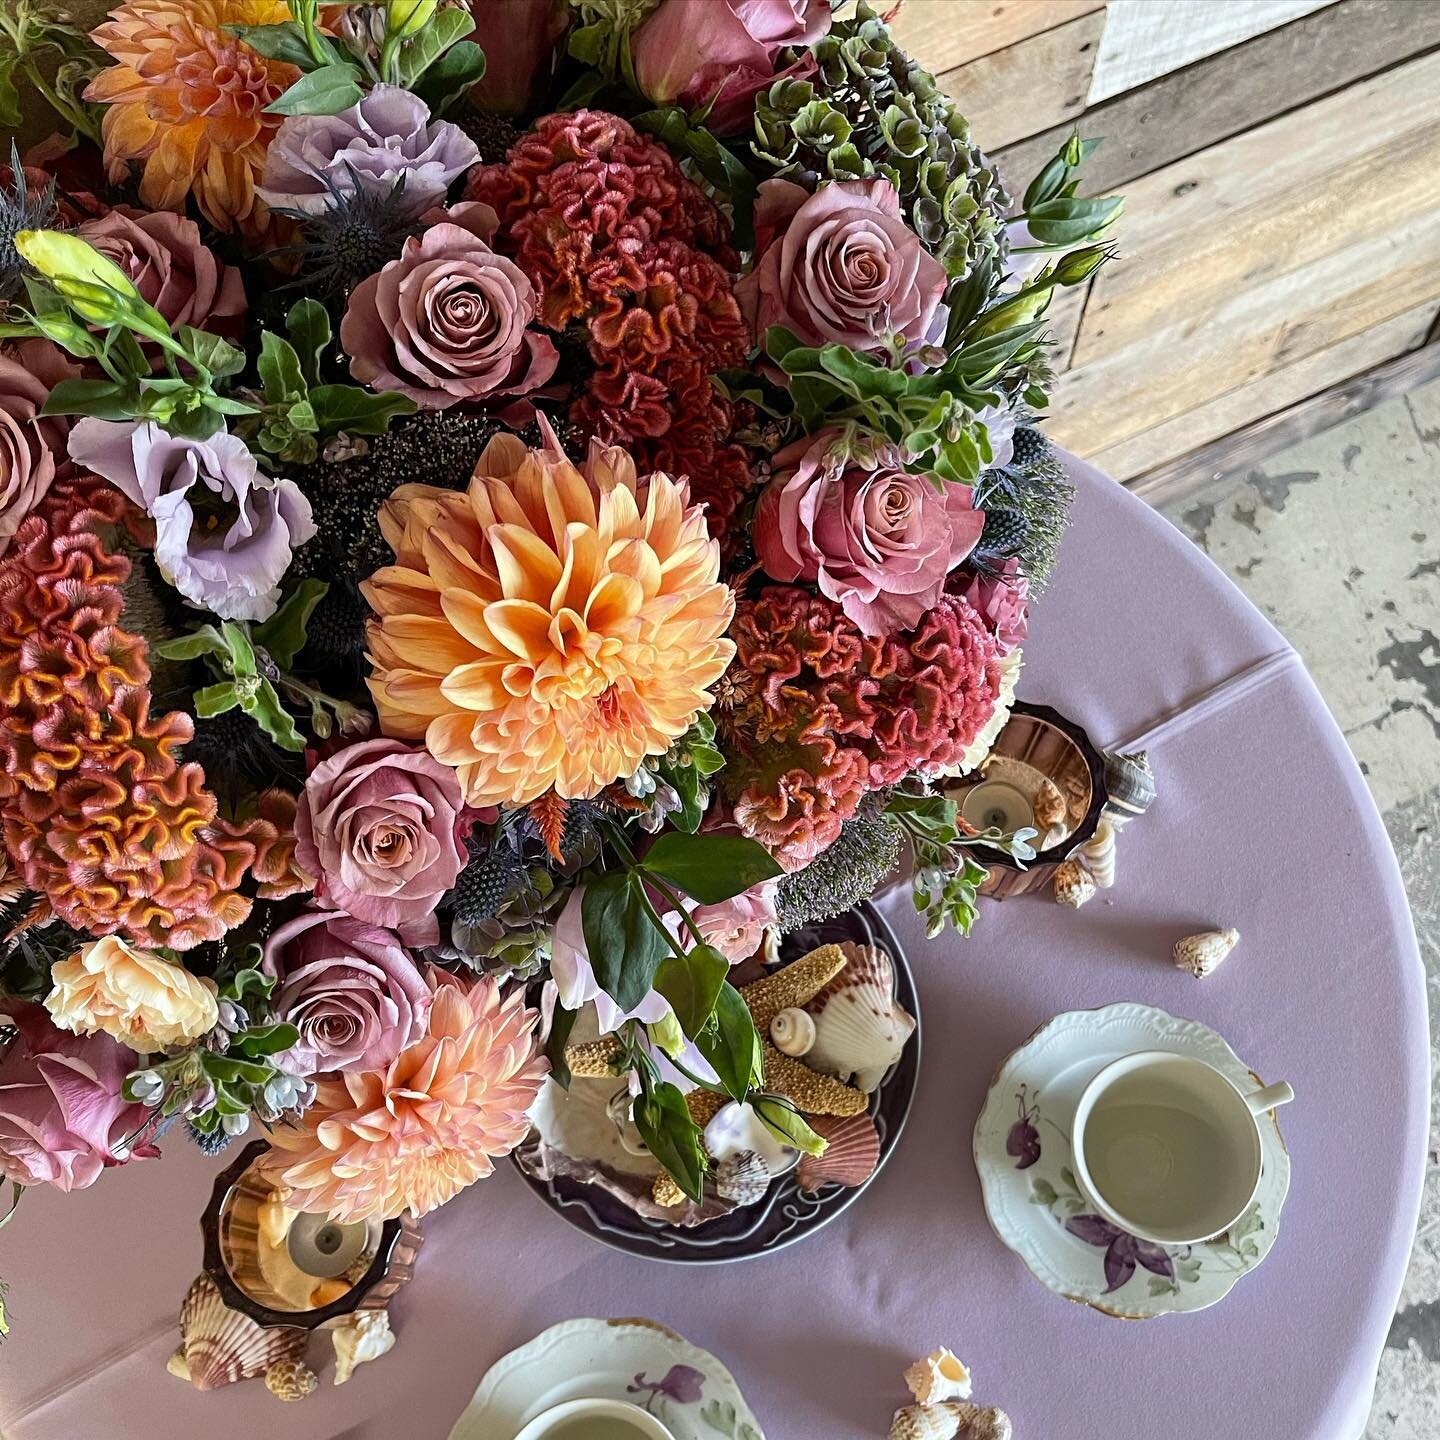 Design inspiration from @rachelkayflowers from our recent open house at @florasourcekansascity and @kcbloomhub. Flowers include beautiful locally grown lisianthus, dahlias, celosia and coxcomb. Also included are dusty purple roses, vintage blue hydra